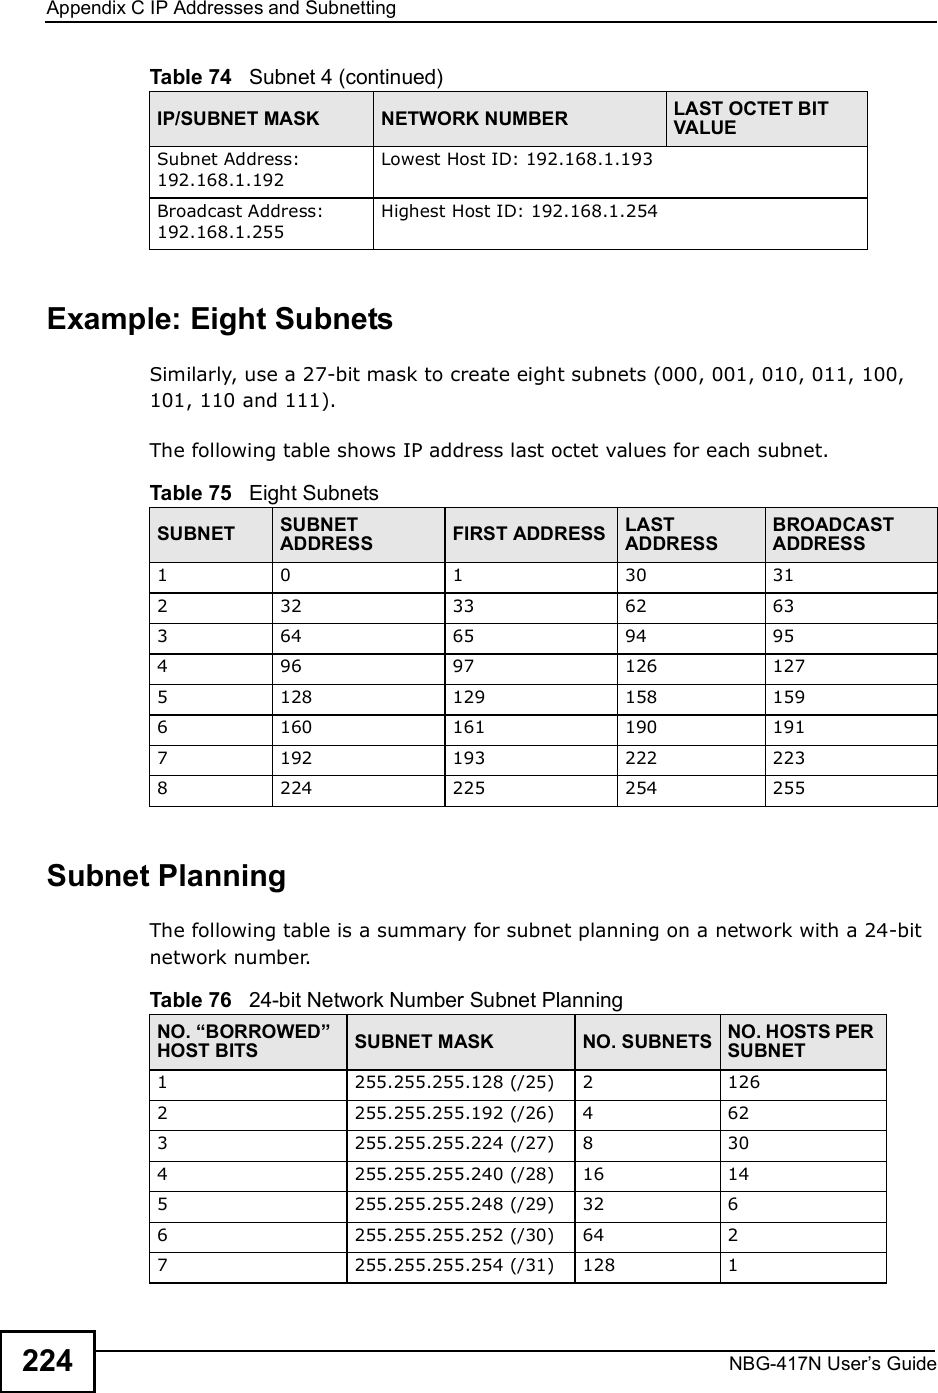 Appendix CIP Addresses and SubnettingNBG-417N User s Guide224Example: Eight SubnetsSimilarly, use a 27-bit mask to create eight subnets (000, 001, 010, 011, 100, 101, 110 and 111). The following table shows IP address last octet values for each subnet.Subnet PlanningThe following table is a summary for subnet planning on a network with a 24-bit network number.Subnet Address: 192.168.1.192Lowest Host ID: 192.168.1.193Broadcast Address: 192.168.1.255Highest Host ID: 192.168.1.254Table 74   Subnet 4 (continued)IP/SUBNET MASK NETWORK NUMBER LAST OCTET BIT VALUETable 75   Eight SubnetsSUBNET SUBNET ADDRESS FIRST ADDRESS LAST ADDRESSBROADCAST ADDRESS10130 312 32 33 62 633 64 65 94 954 96 97 126 1275 128 129 158 1596 160 161 190 1917 192 193 222 2238 224 225 254 255Table 76   24-bit Network Number Subnet PlanningNO. !BORROWED&quot; HOST BITS SUBNET MASK NO. SUBNETS NO. HOSTS PER SUBNET1255.255.255.128 (/25) 2 1262 255.255.255.192 (/26) 4 623 255.255.255.224 (/27) 8 304 255.255.255.240 (/28) 16 145 255.255.255.248 (/29) 32 66 255.255.255.252 (/30) 64 27 255.255.255.254 (/31) 128 1